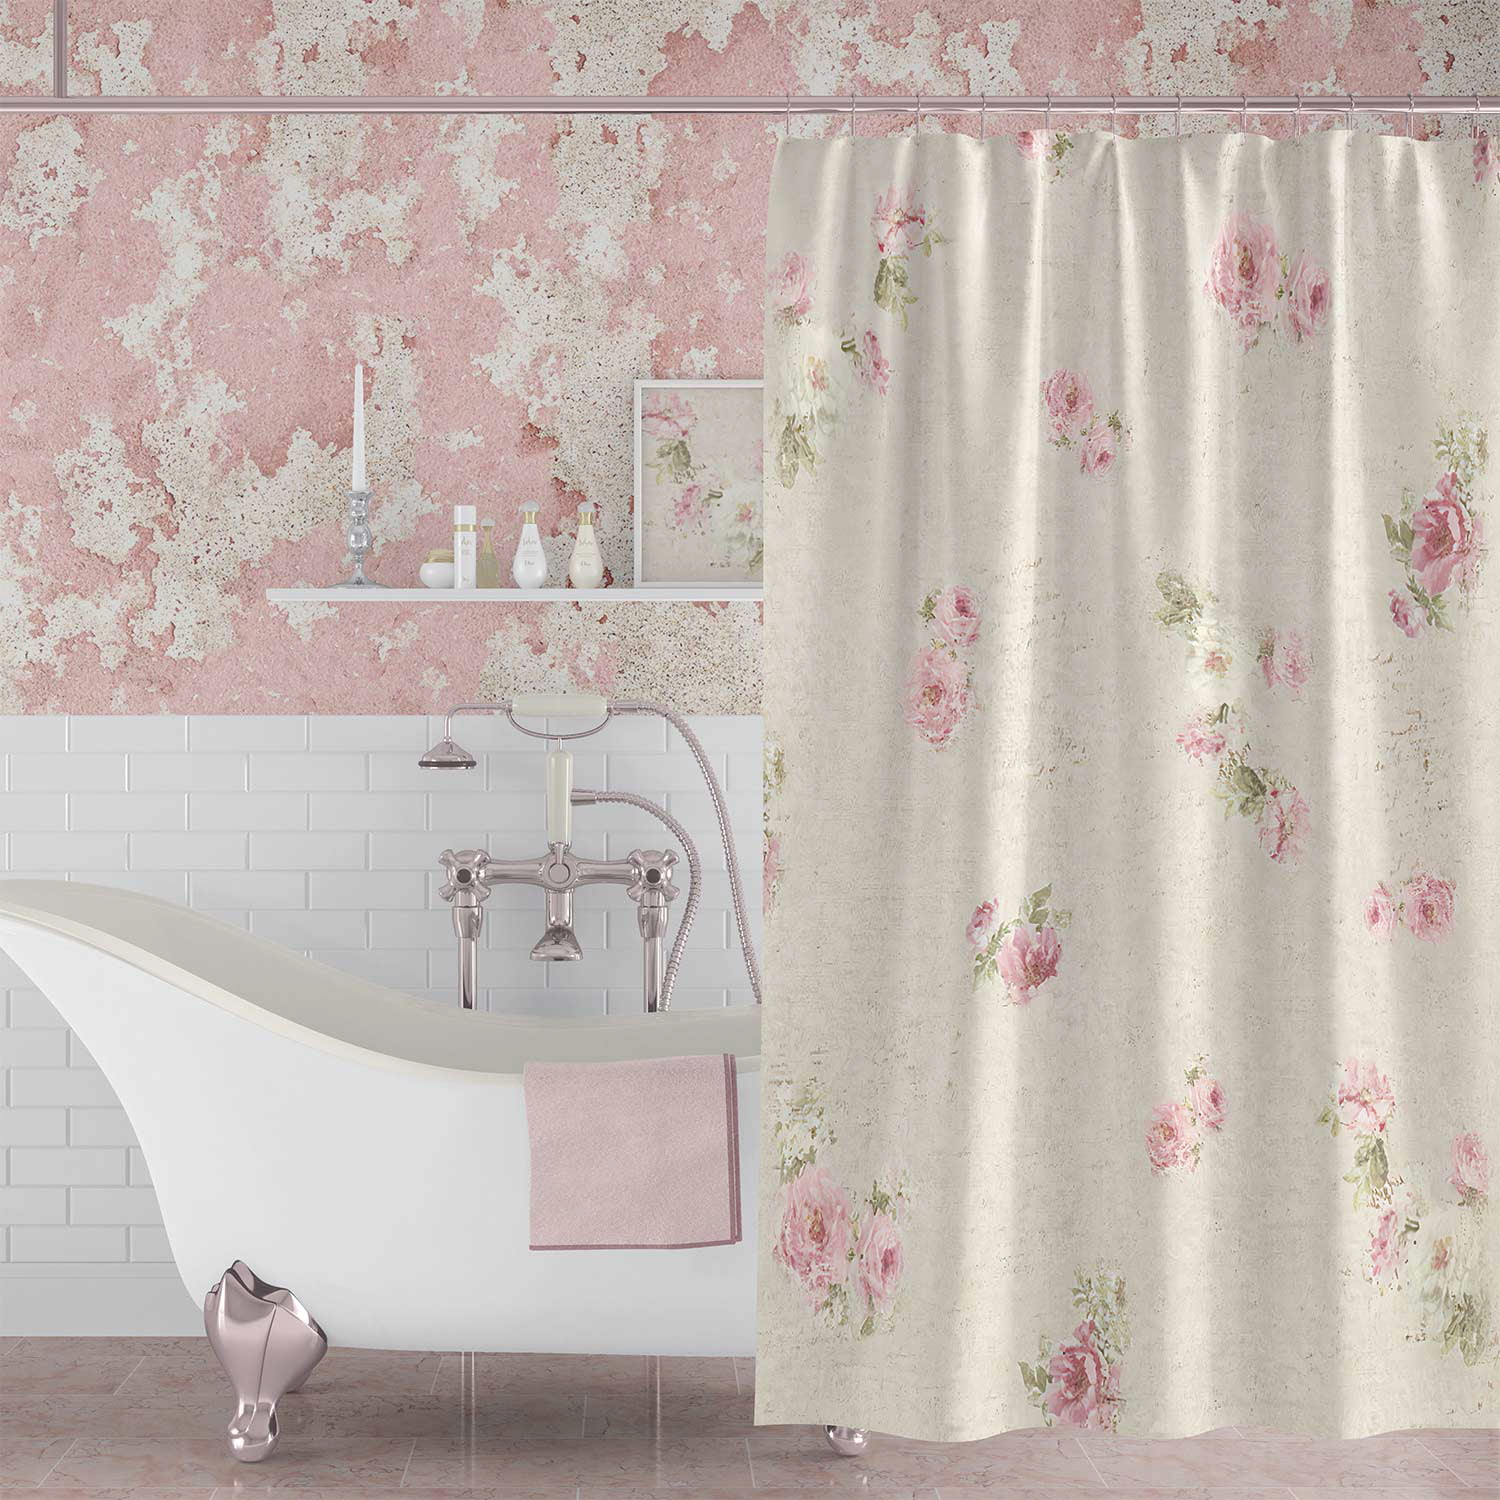 Front view of shabby chic floral shower curtain.